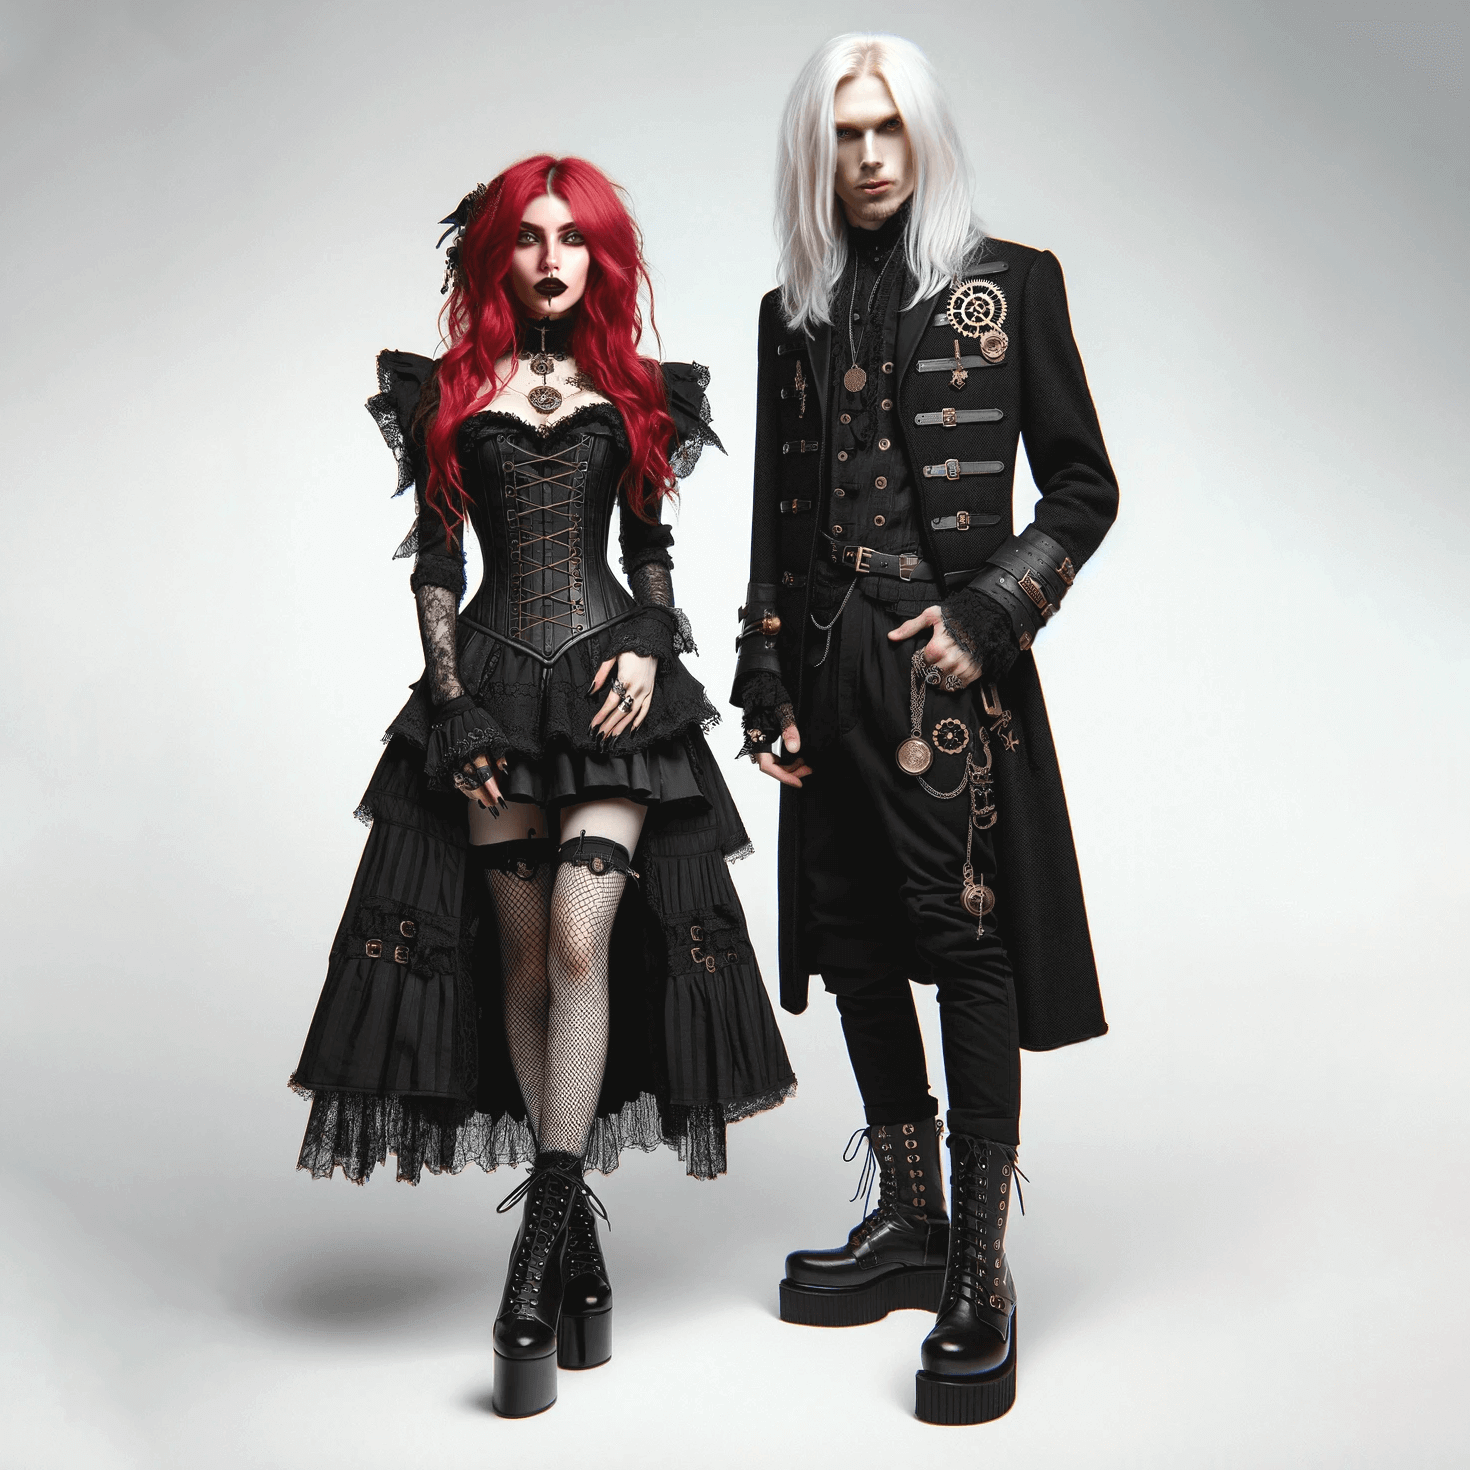 Gothic couple in black attire with red-haired woman and white-haired man.